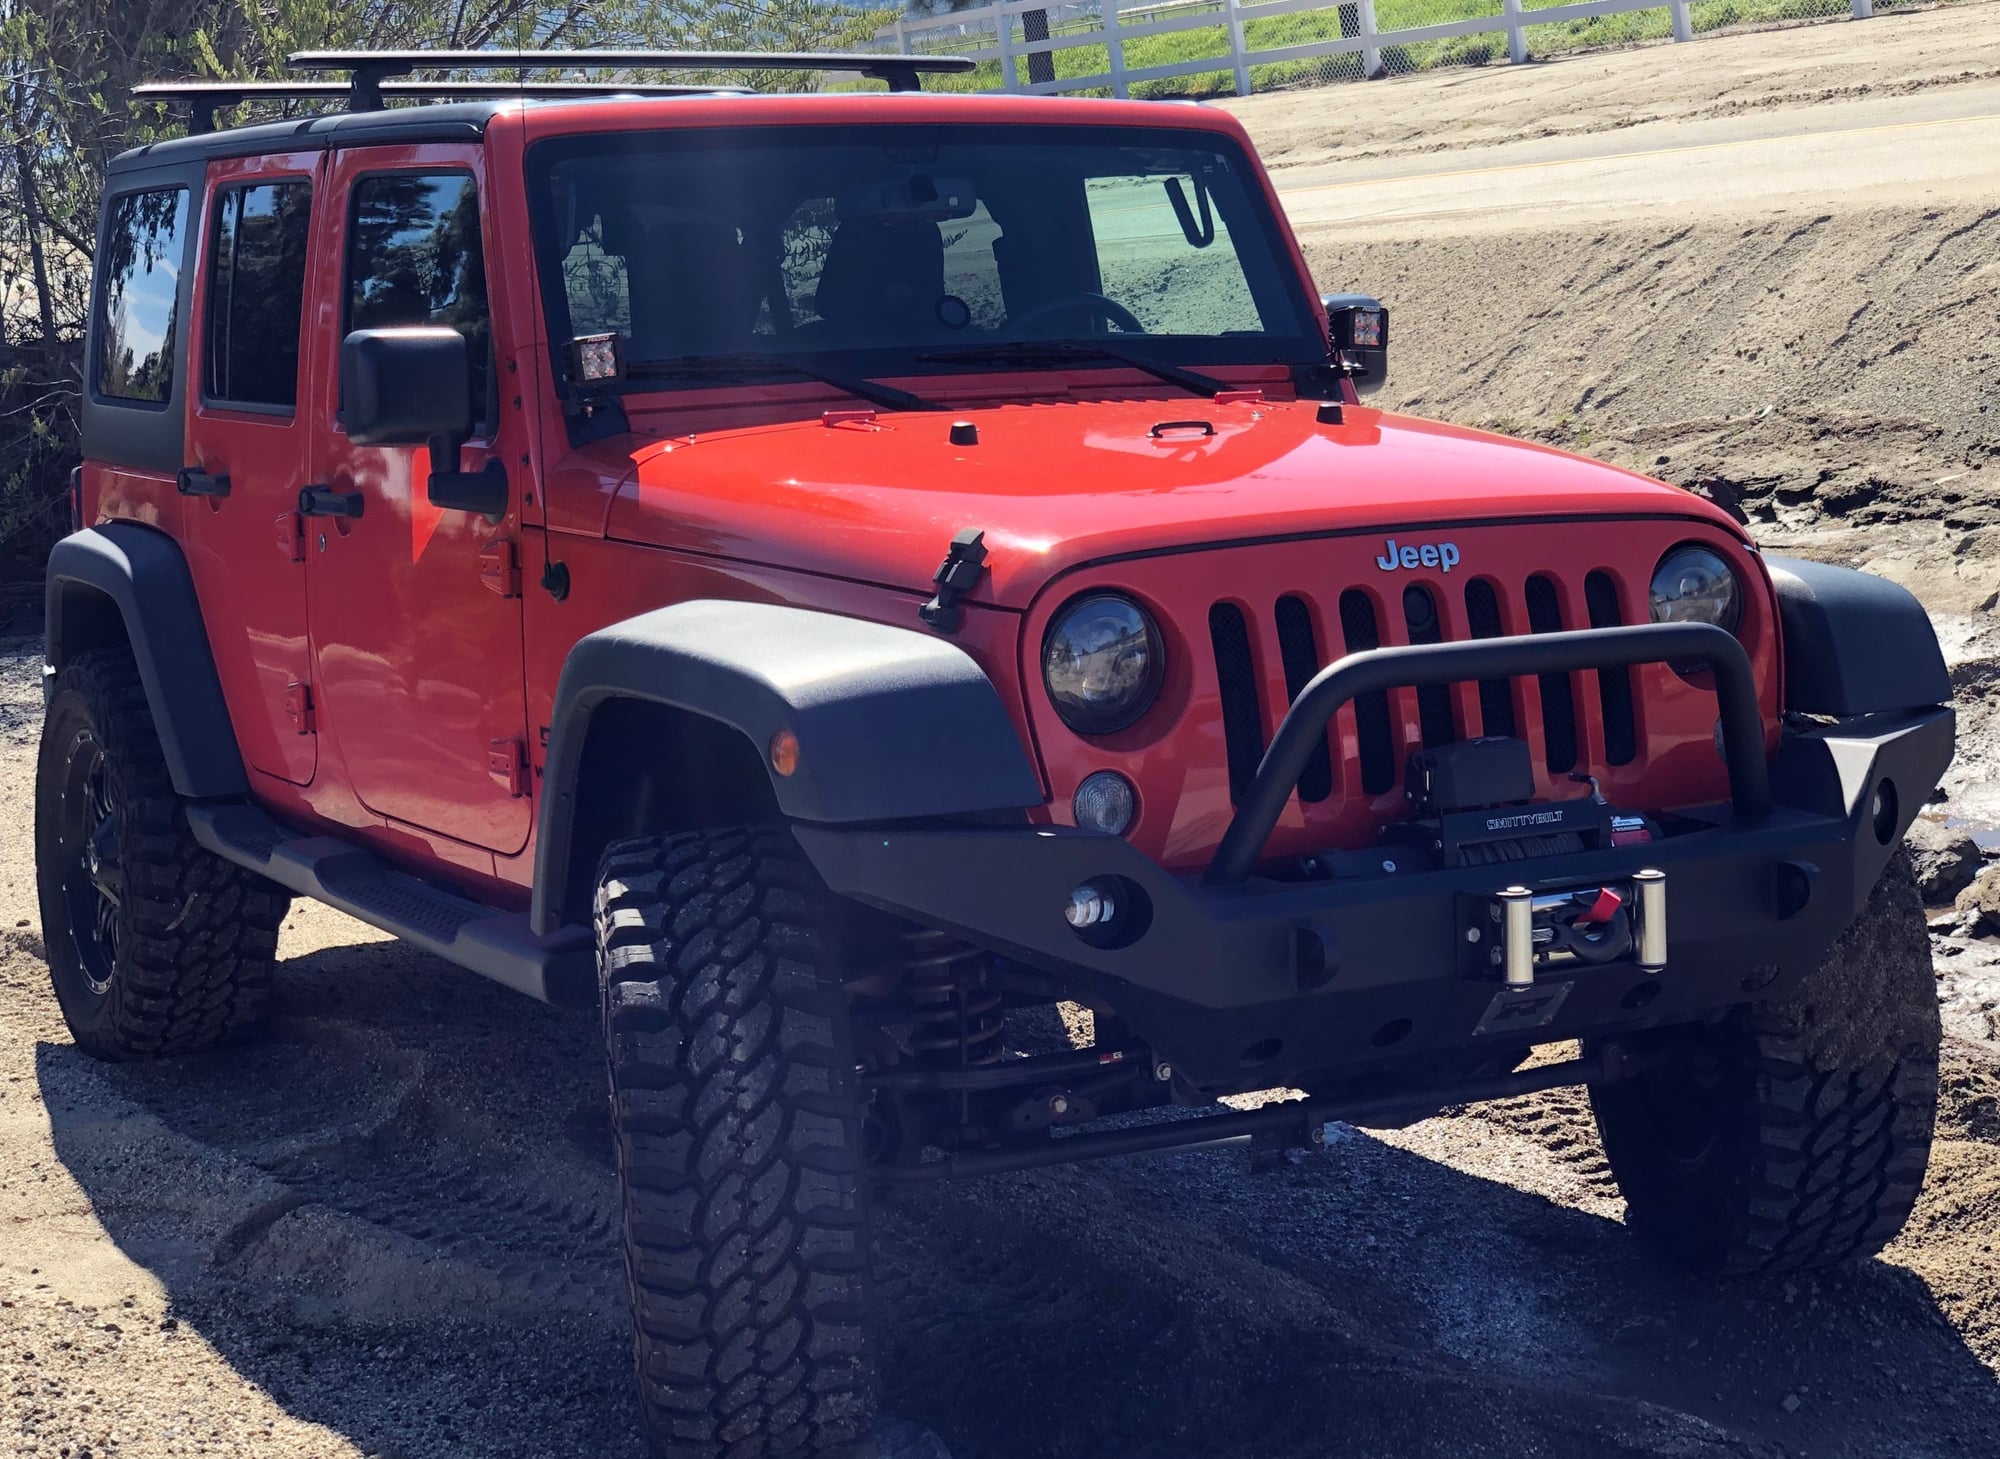 2015 Jeep Wrangler - Ready to go anywhere jku in excellent condition. - Used - VIN 1C4BJWDGXFL699189 - 92,000 Miles - 6 cyl - 4WD - Automatic - SUV - Orange - Murrieta, CA 92563, United States